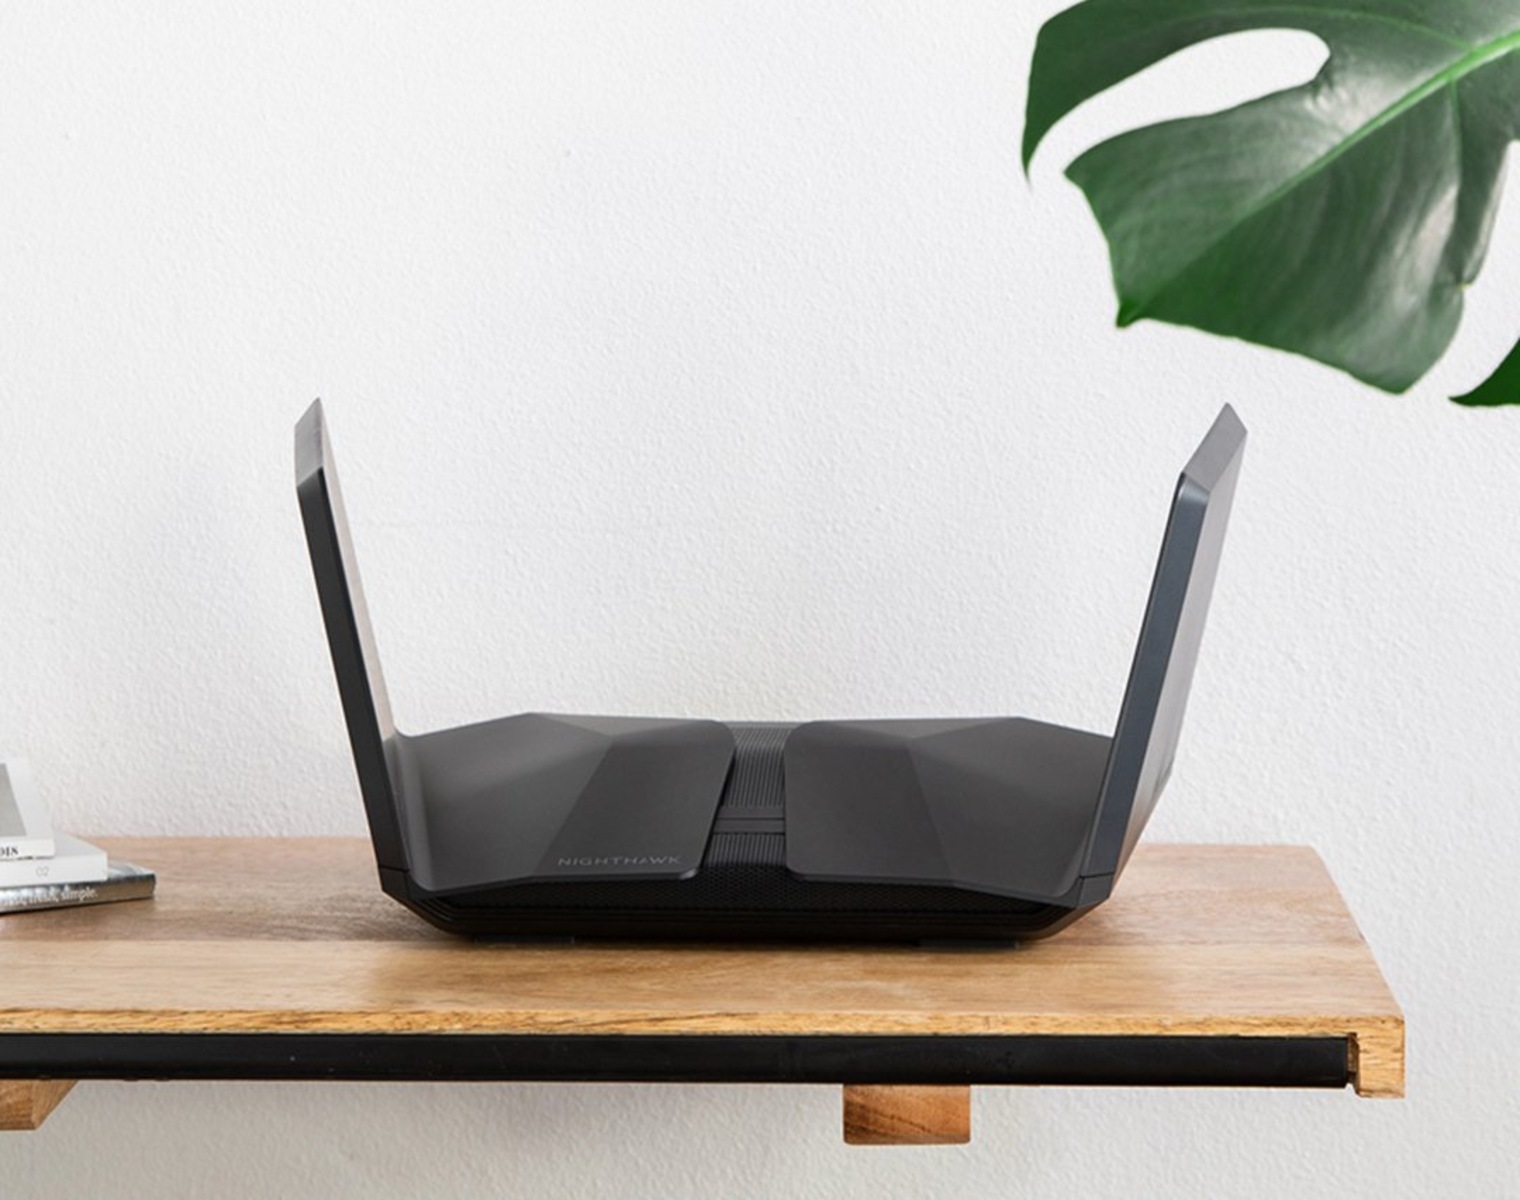 How To Connect Your Laptop To A Netgear Wireless Router